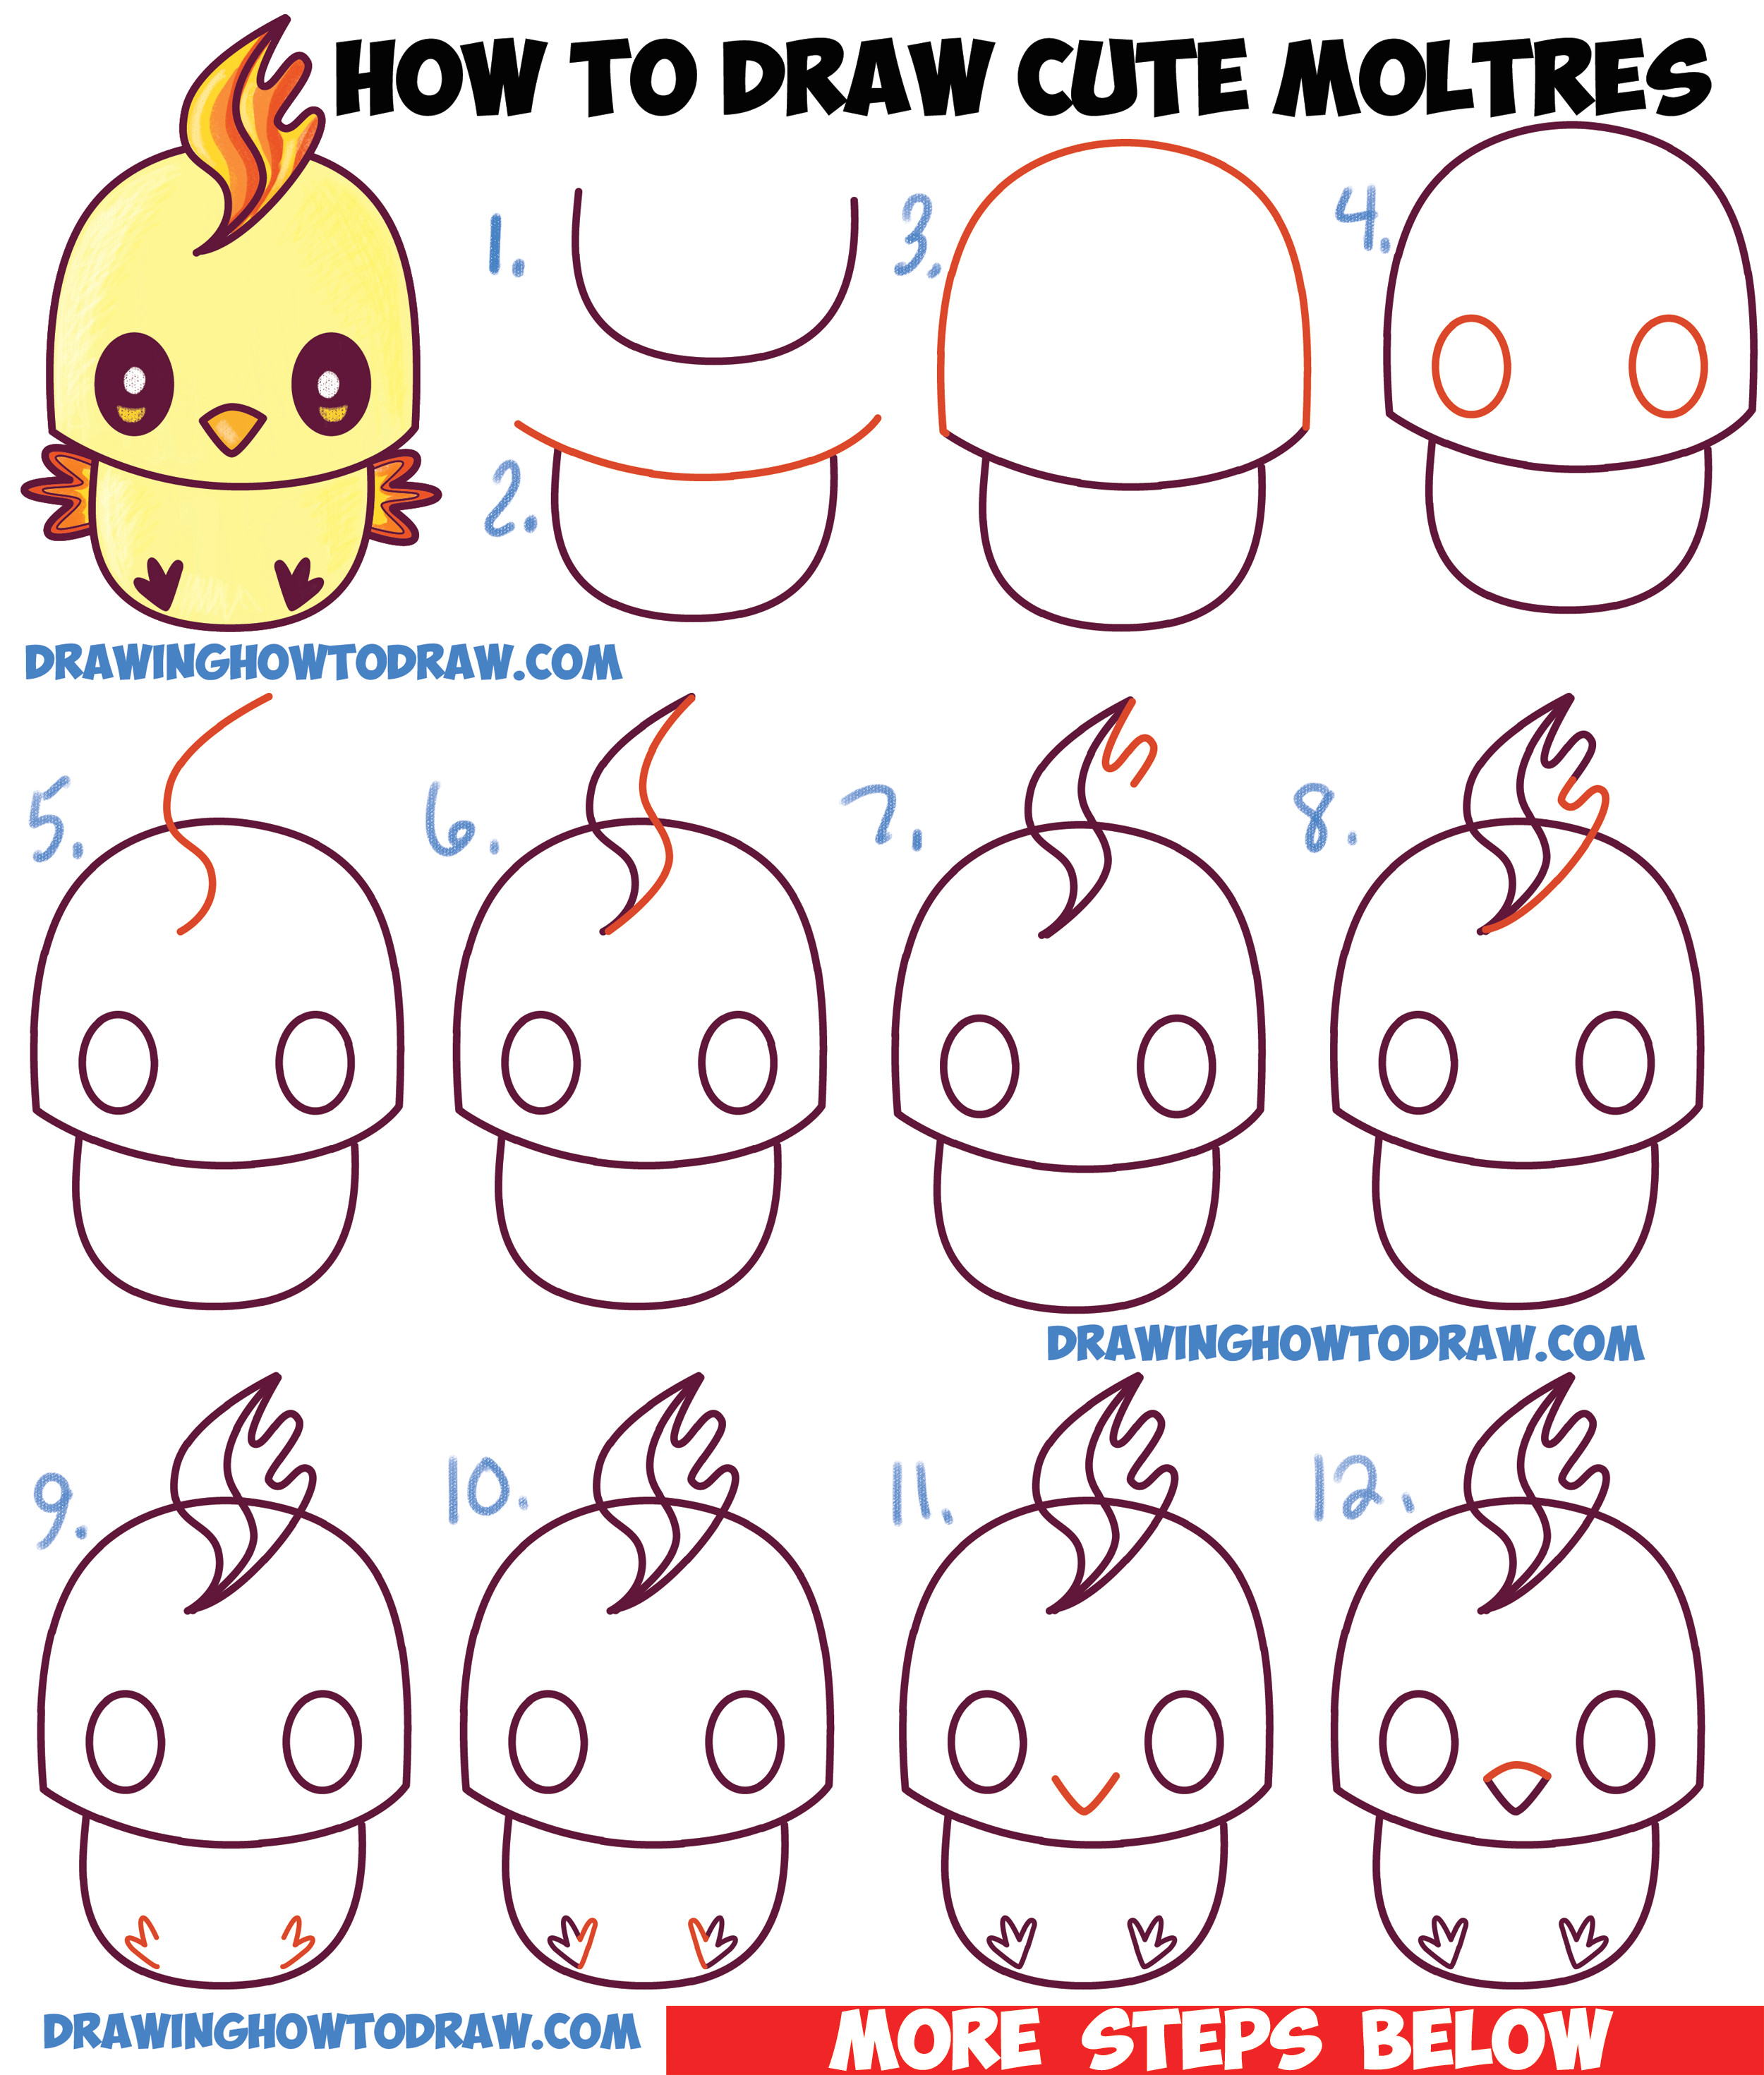 Drawing Cartoons Tutorials for Beginners How to Draw Cute Kawaii Chibi Moltres From Pokemon In Easy Step